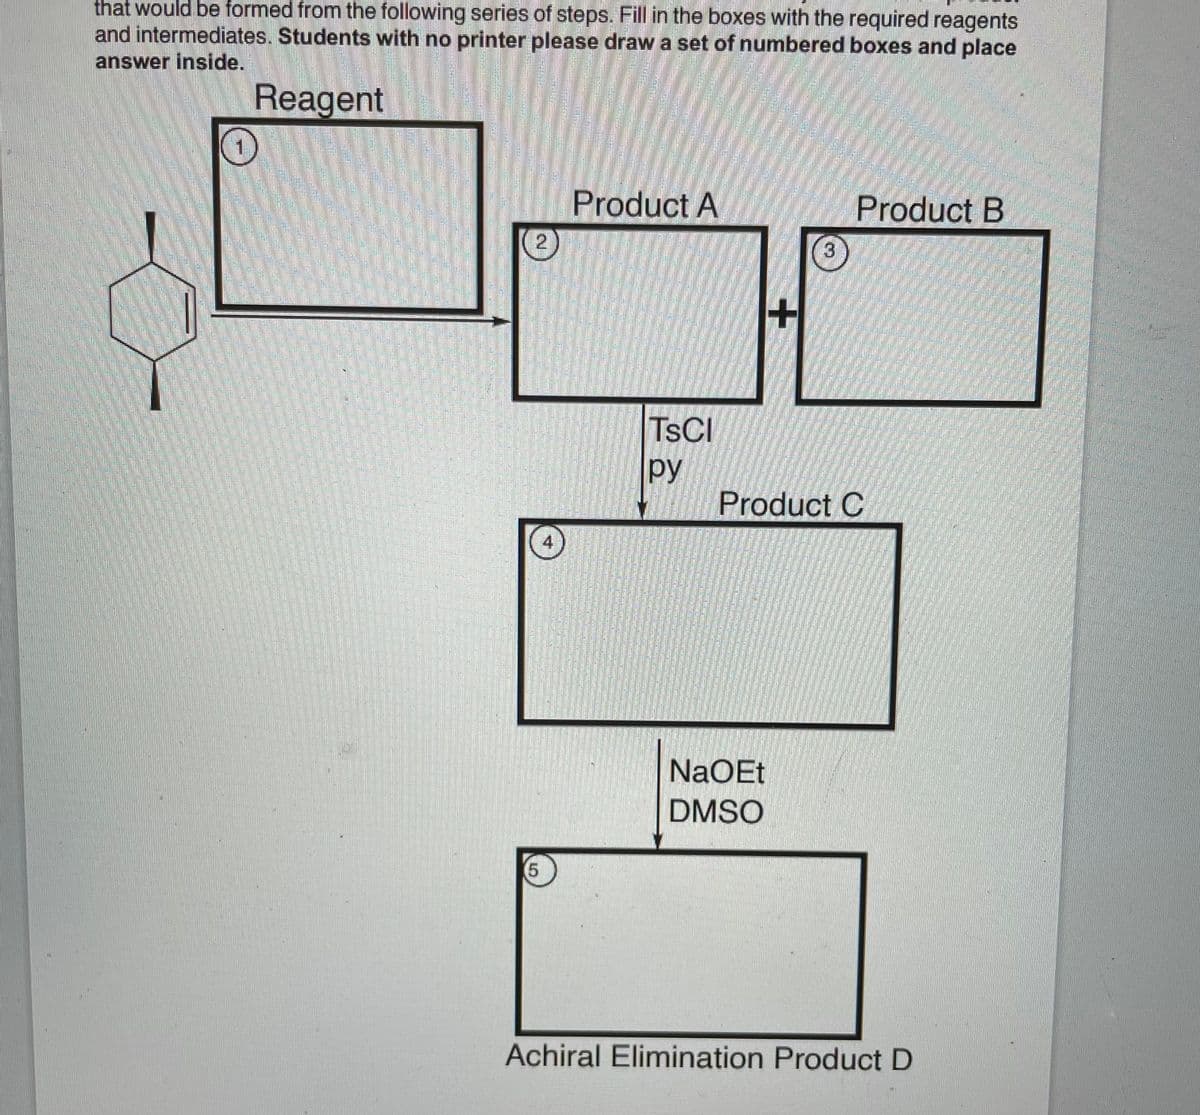 that would be formed from the following series of steps. Fill in the boxes with the required reagents
and intermediates. Students with no printer please draw a set of numbered boxes and place
answer inside.
Reagent
Product A
Product B
3
TSCI
py
Product C
4
NaOEt
DMSO
(5
Achiral Elimination Product D
amtime
23F
